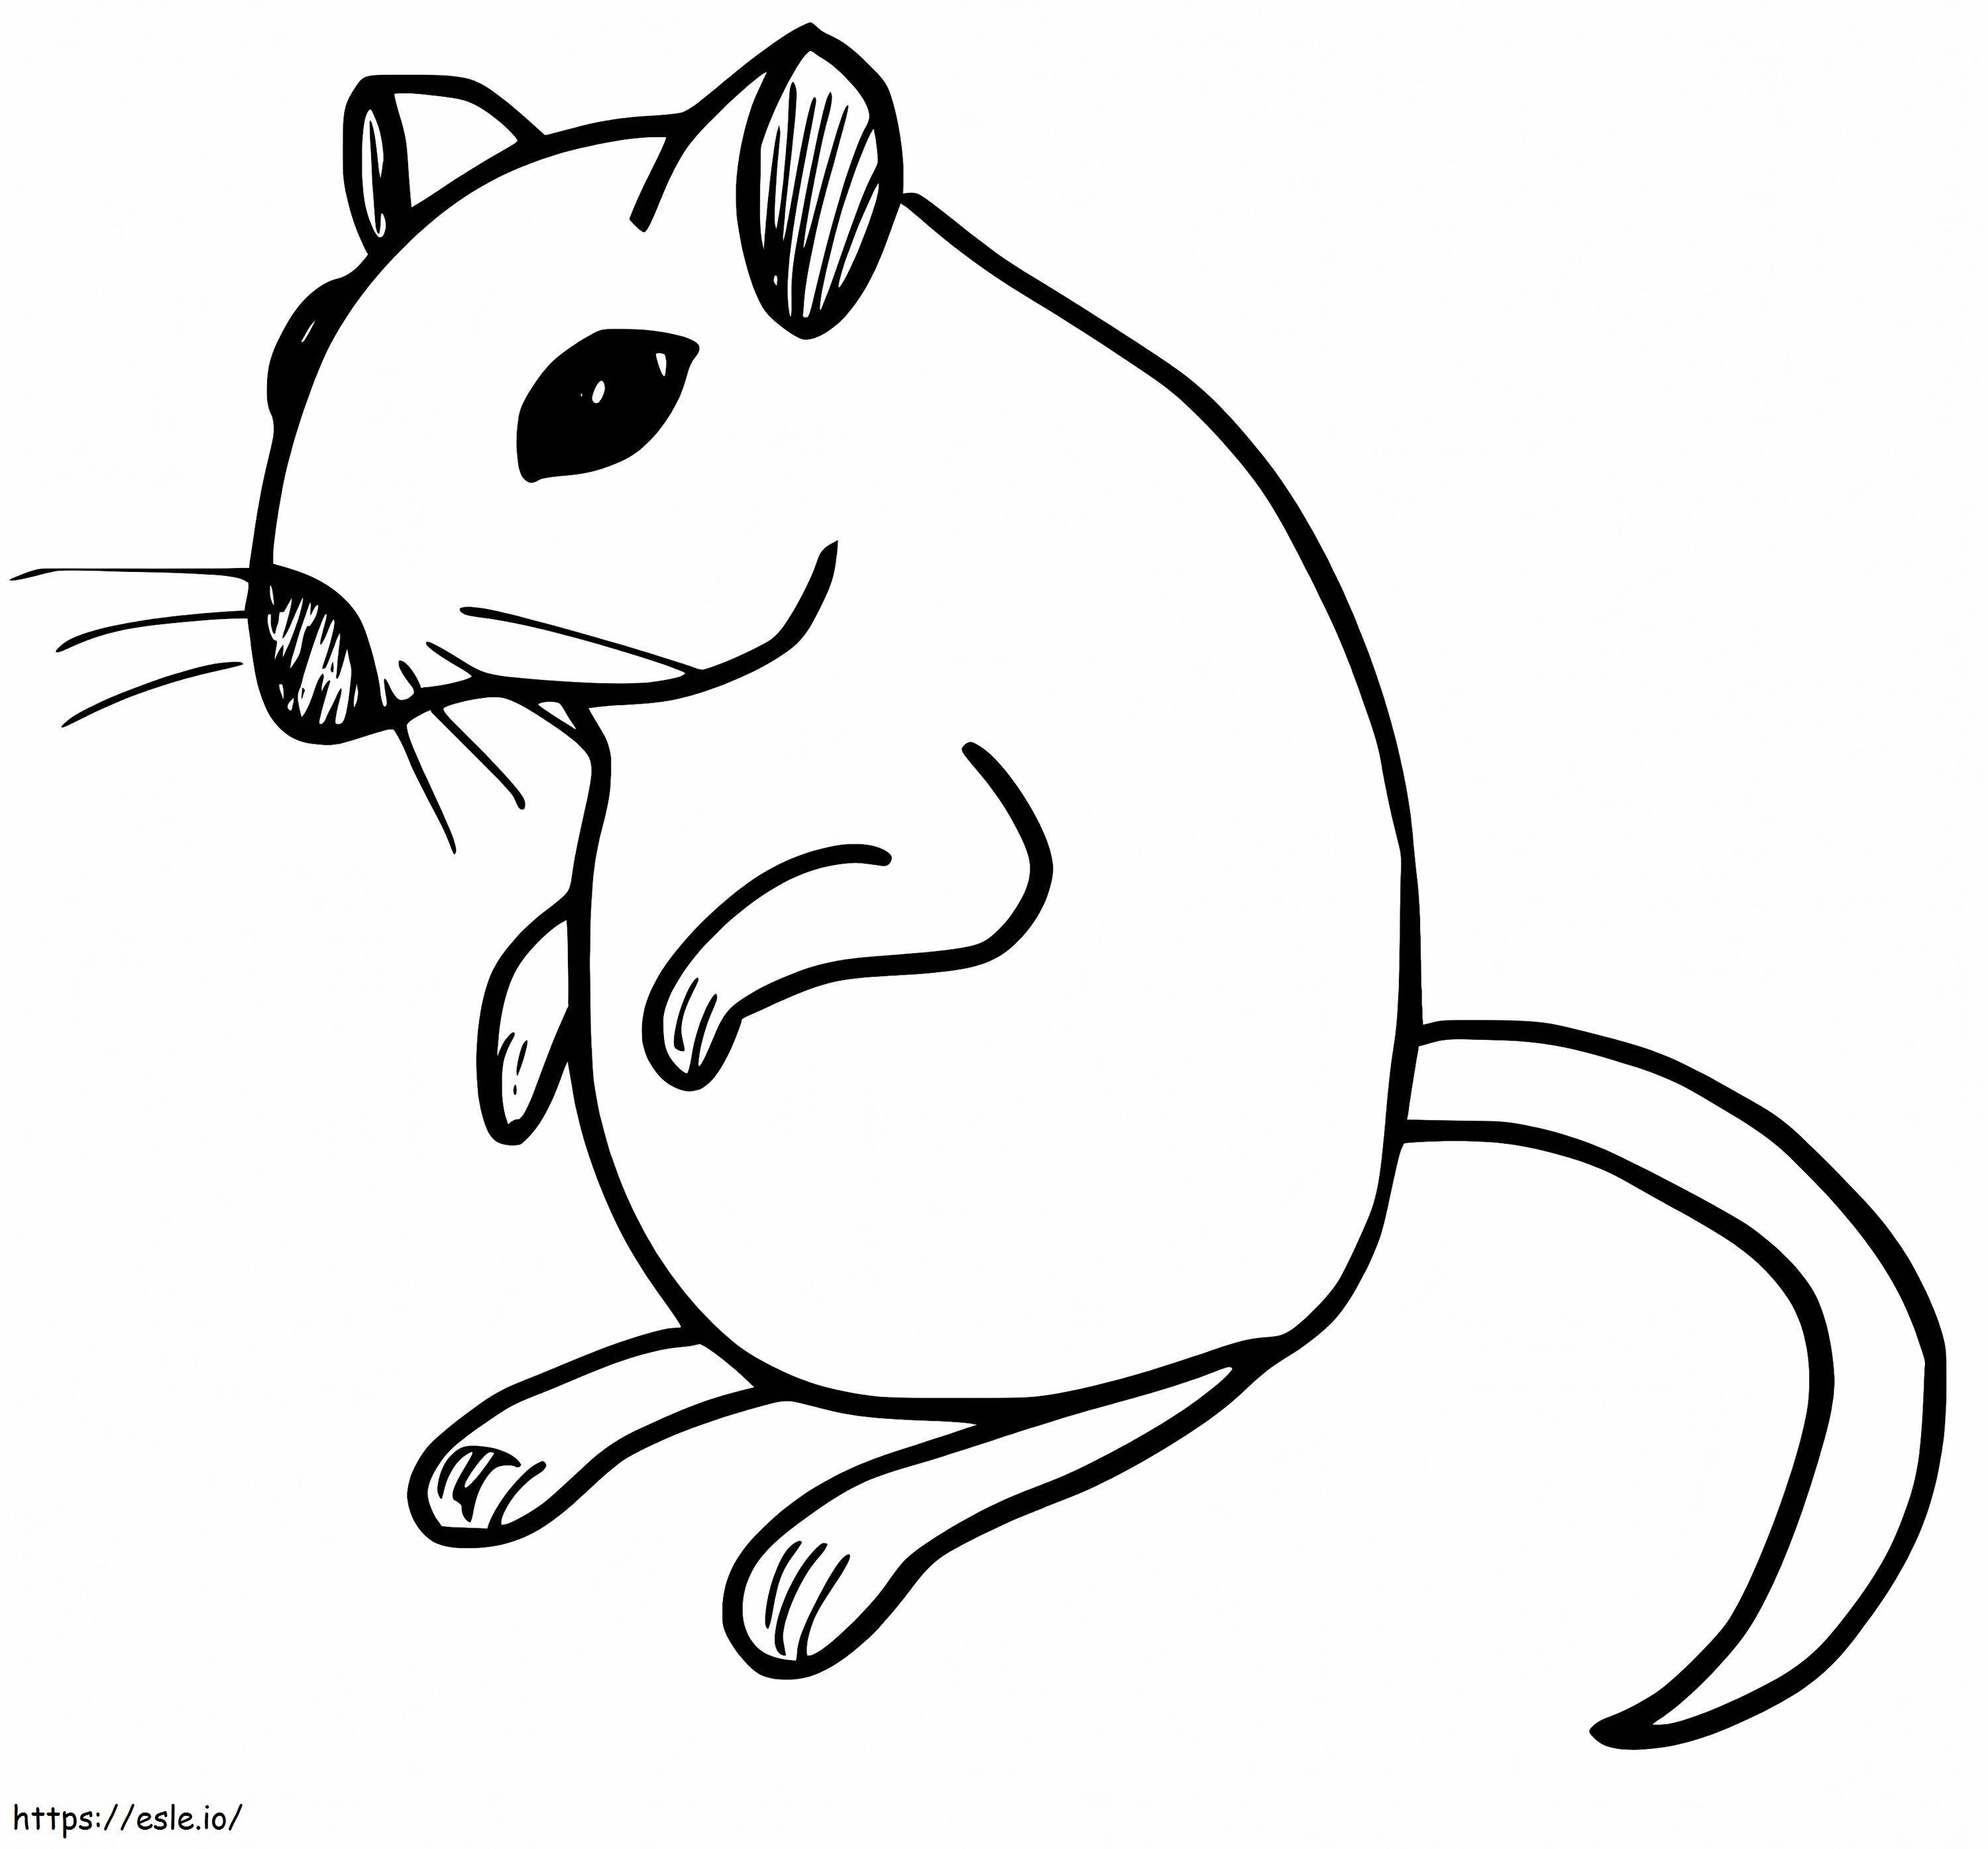 Rat To Print coloring page